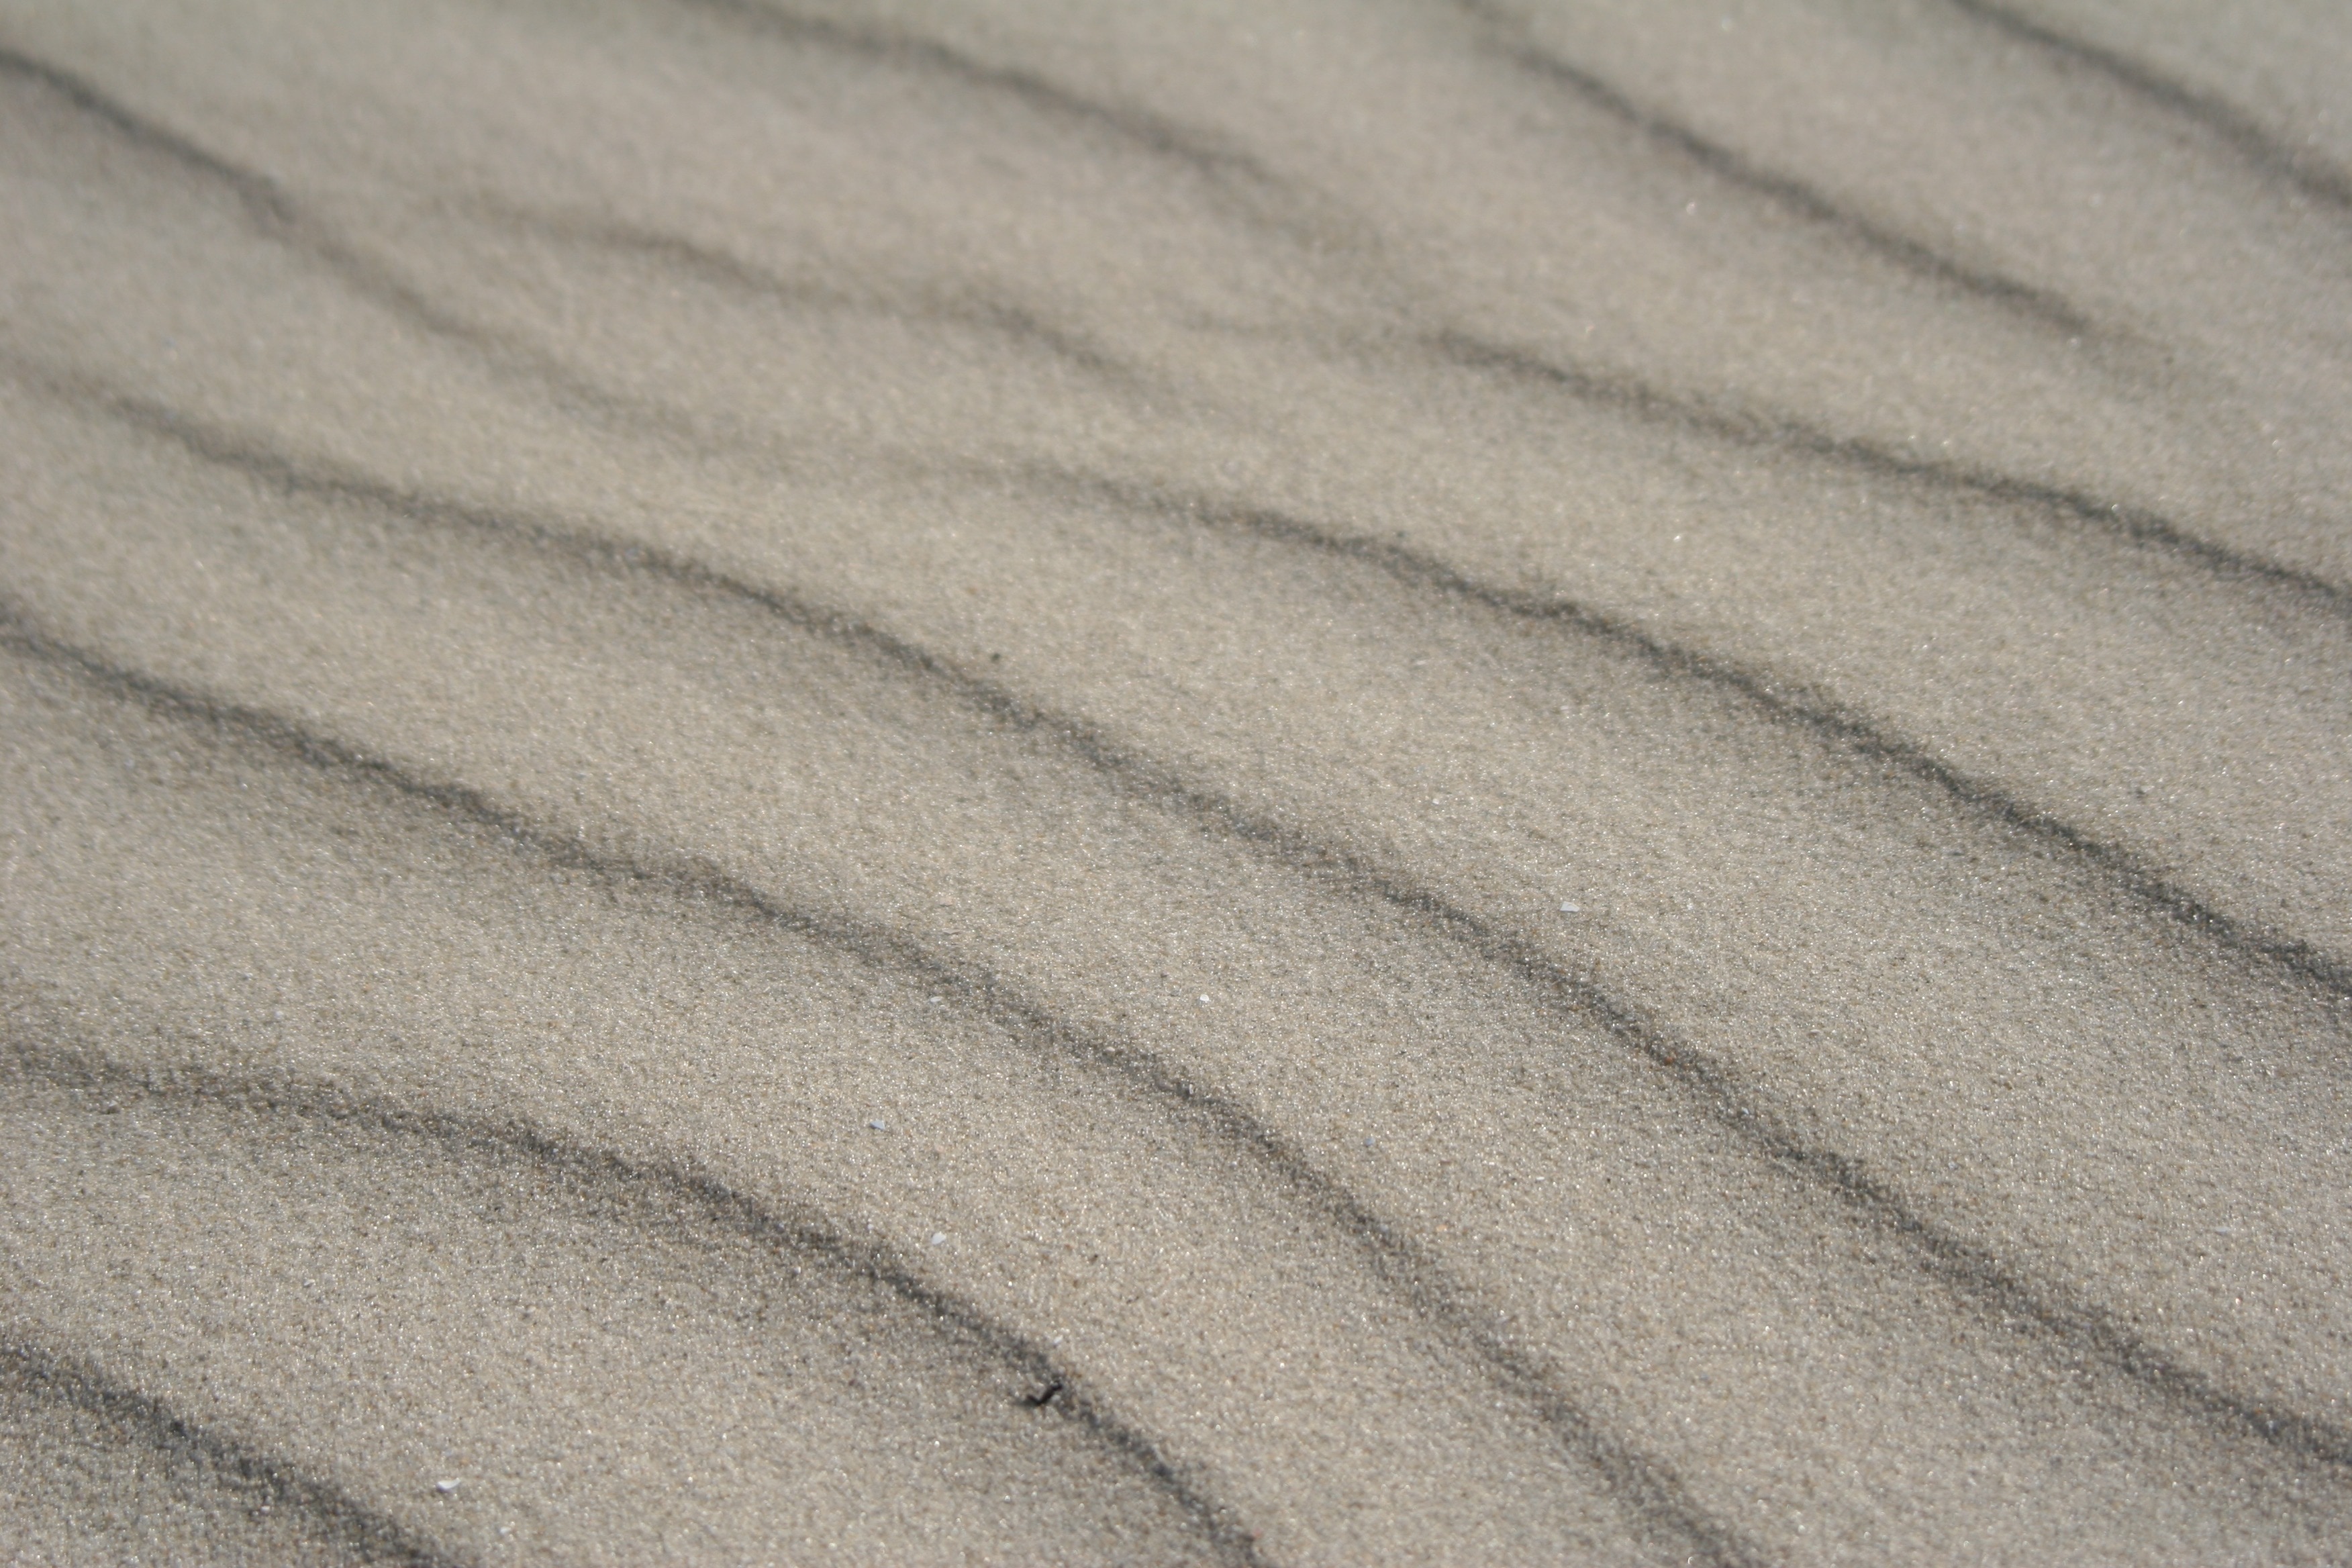 Wind Structure In The Sand, Beach, Sand, backgrounds, textile